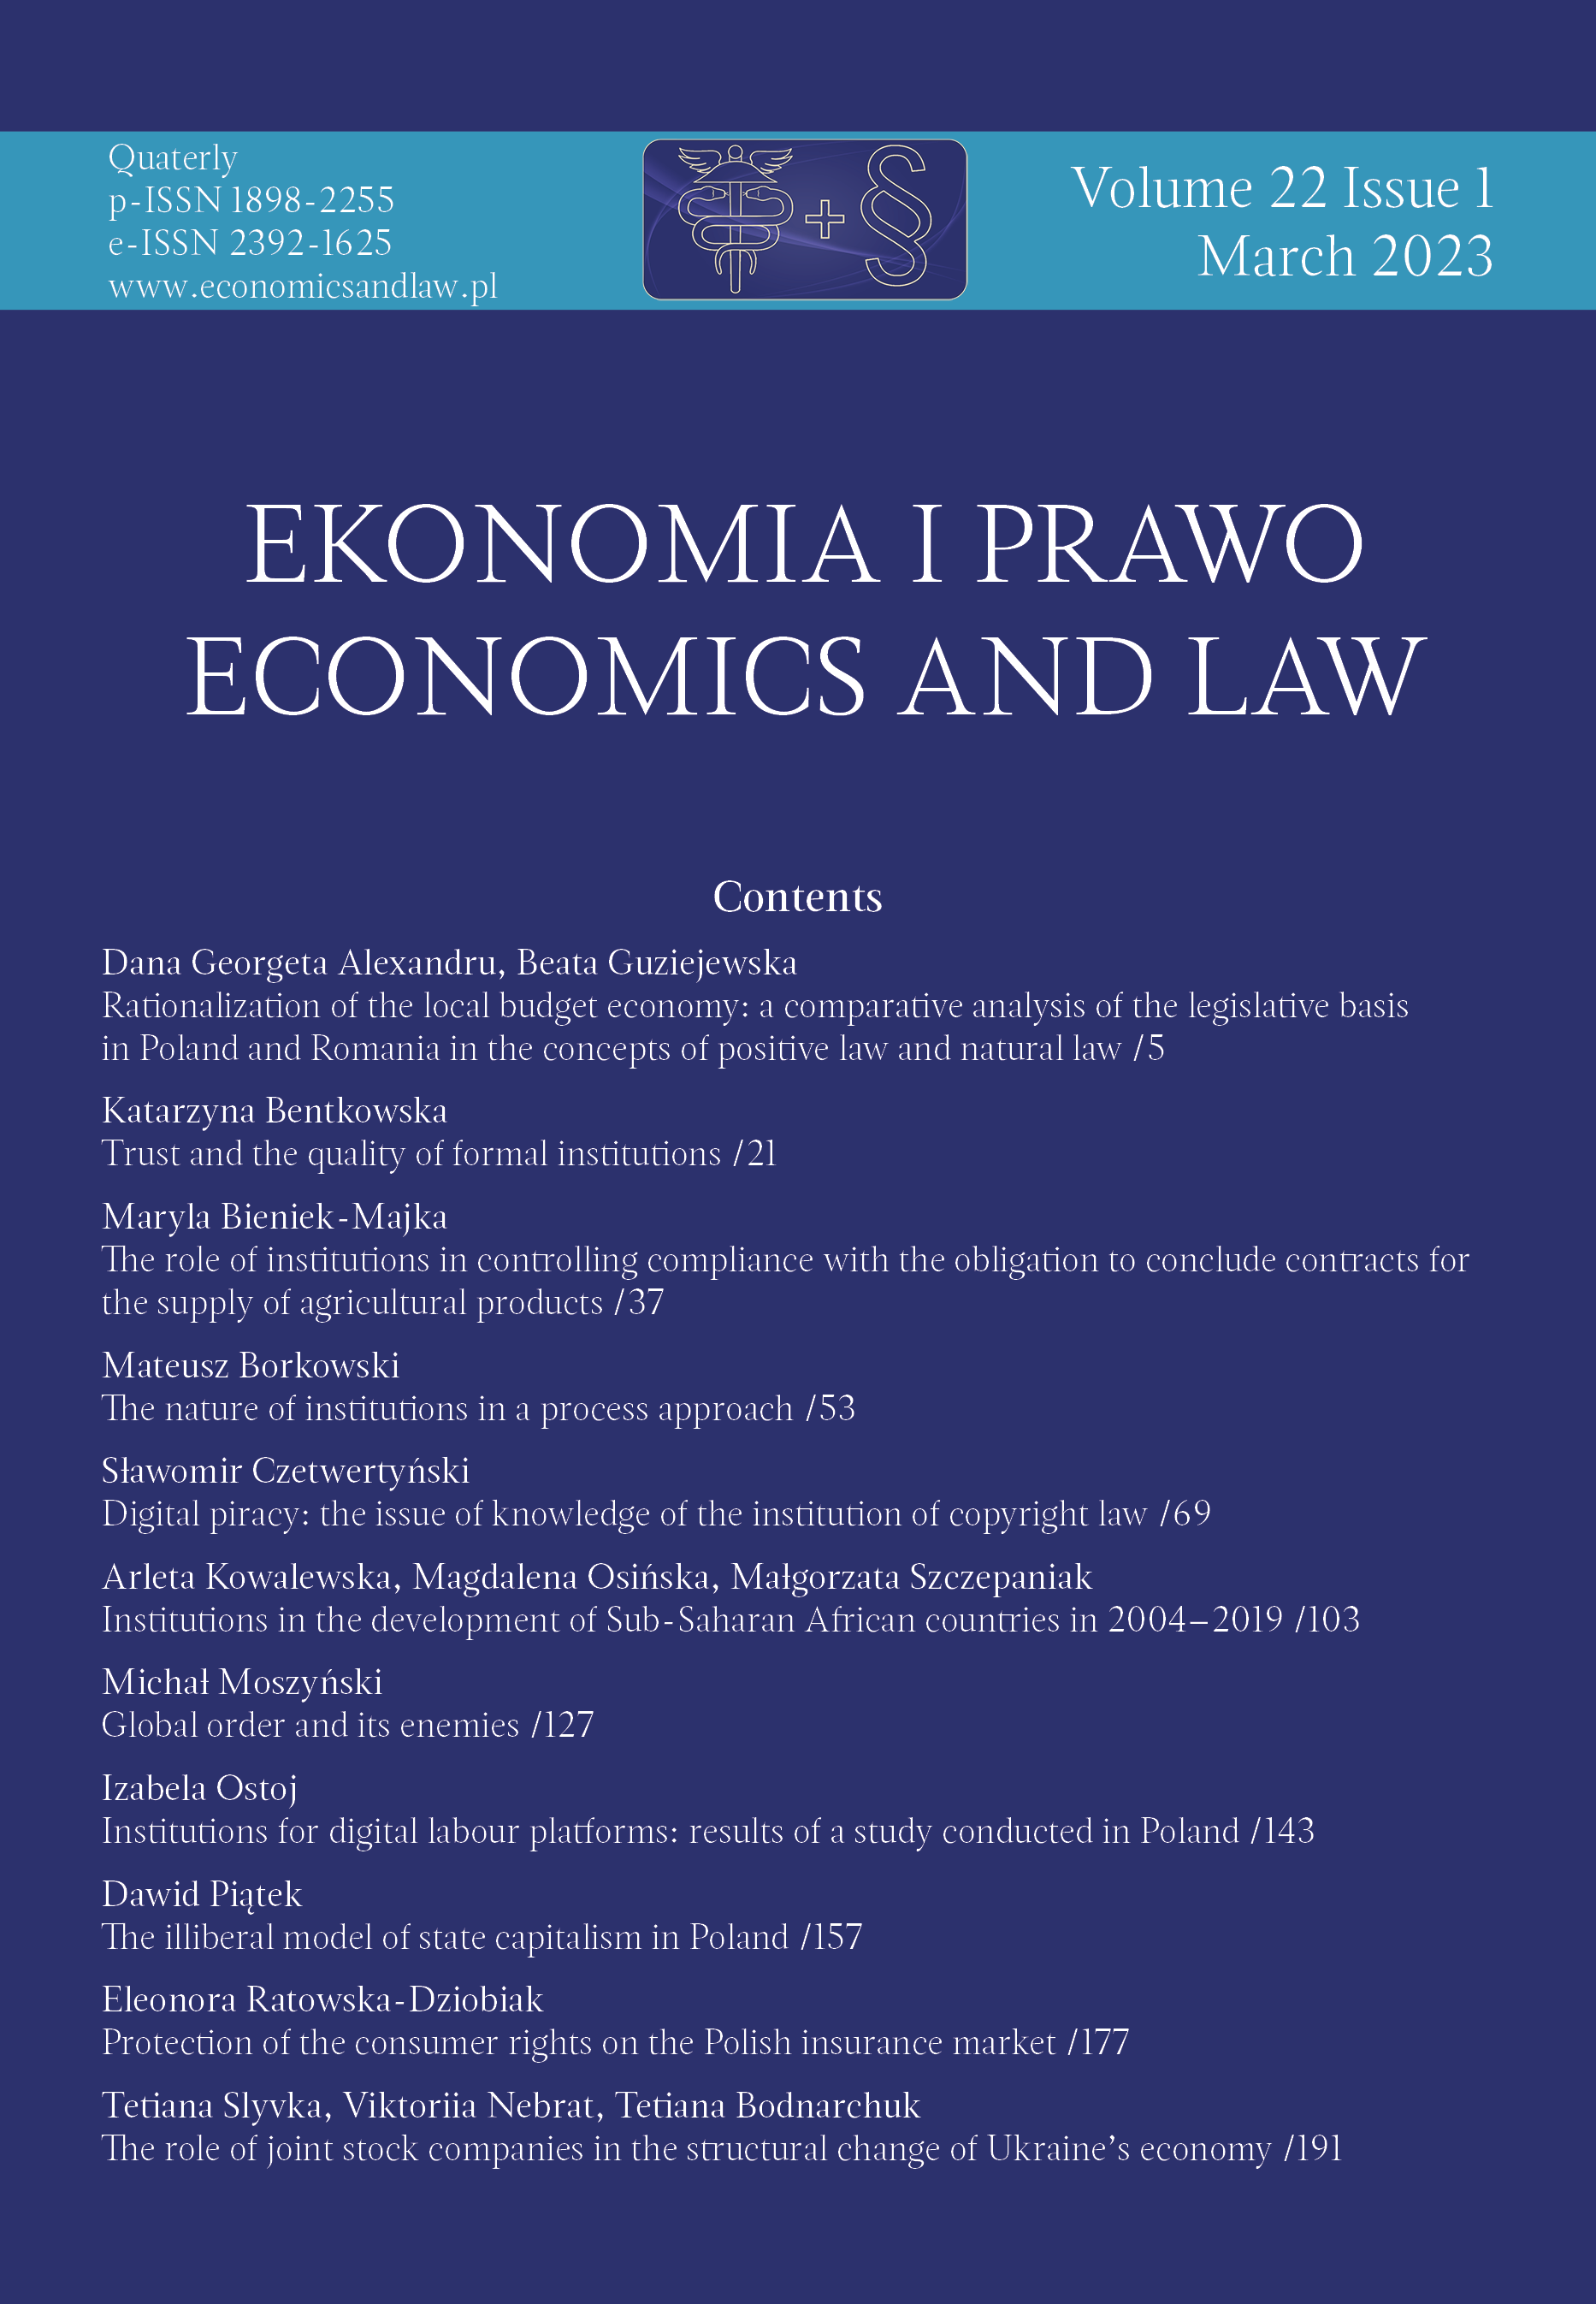 Rationalization of the local budget
economy: a comparative analysis
of the legislative basis in Poland
and Romania in the concepts of positive
law and natural law